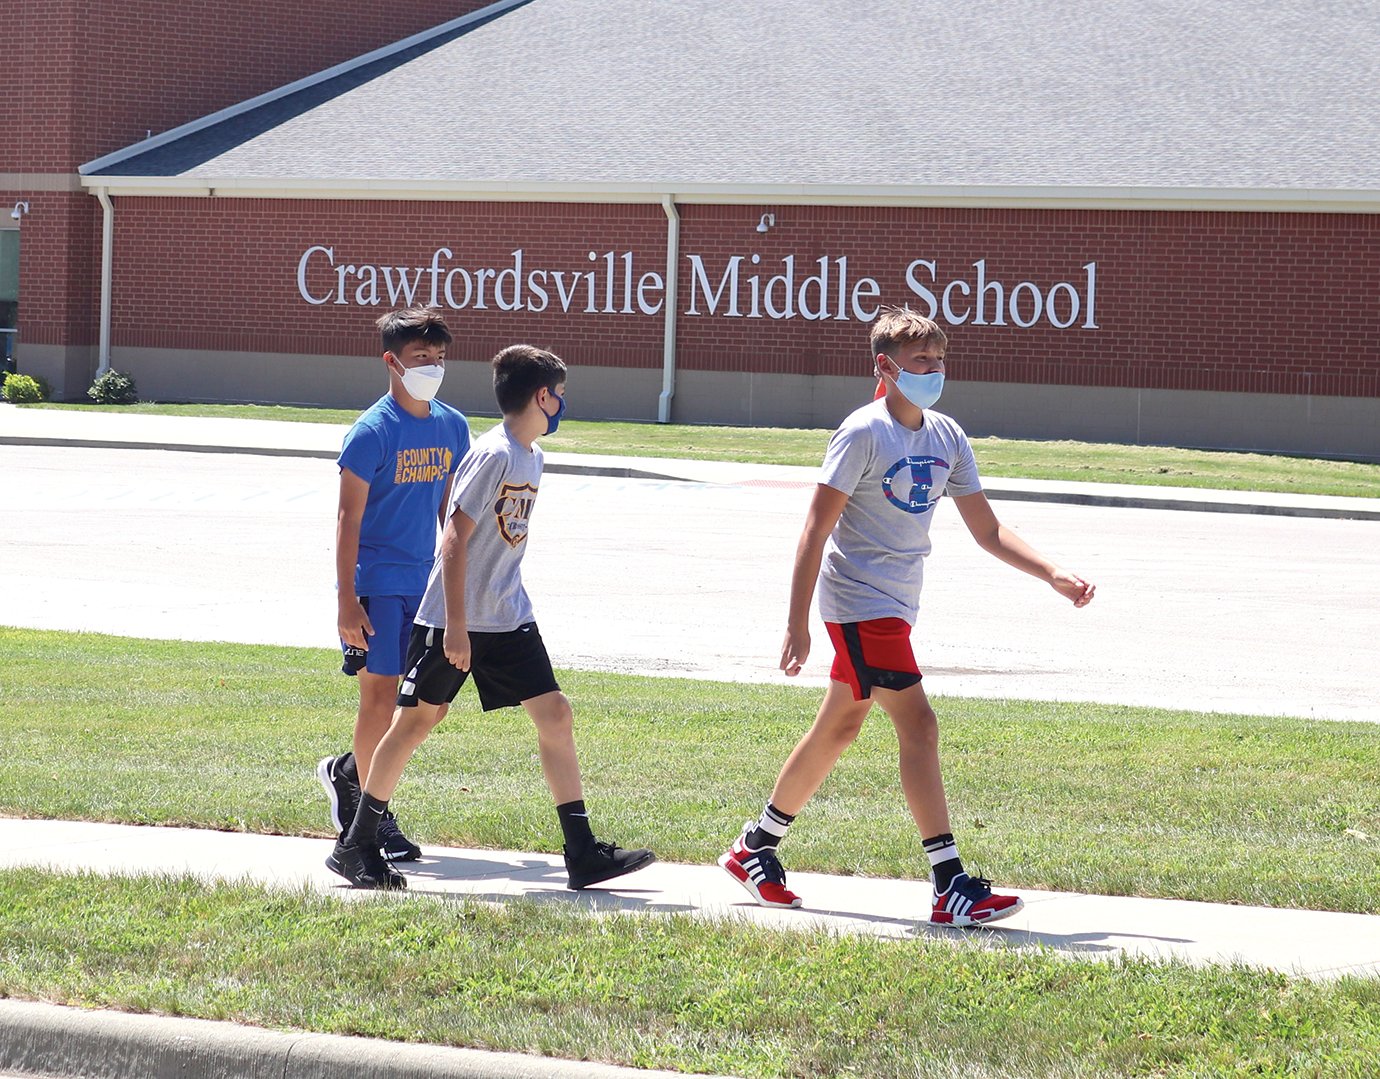 Seventh graders Jaziel Gil Herrera, from left, Hayden Craig and Maddox Ball lead the pack Tuesday at Crawfordville Middle School during a physical education warm-up walk.